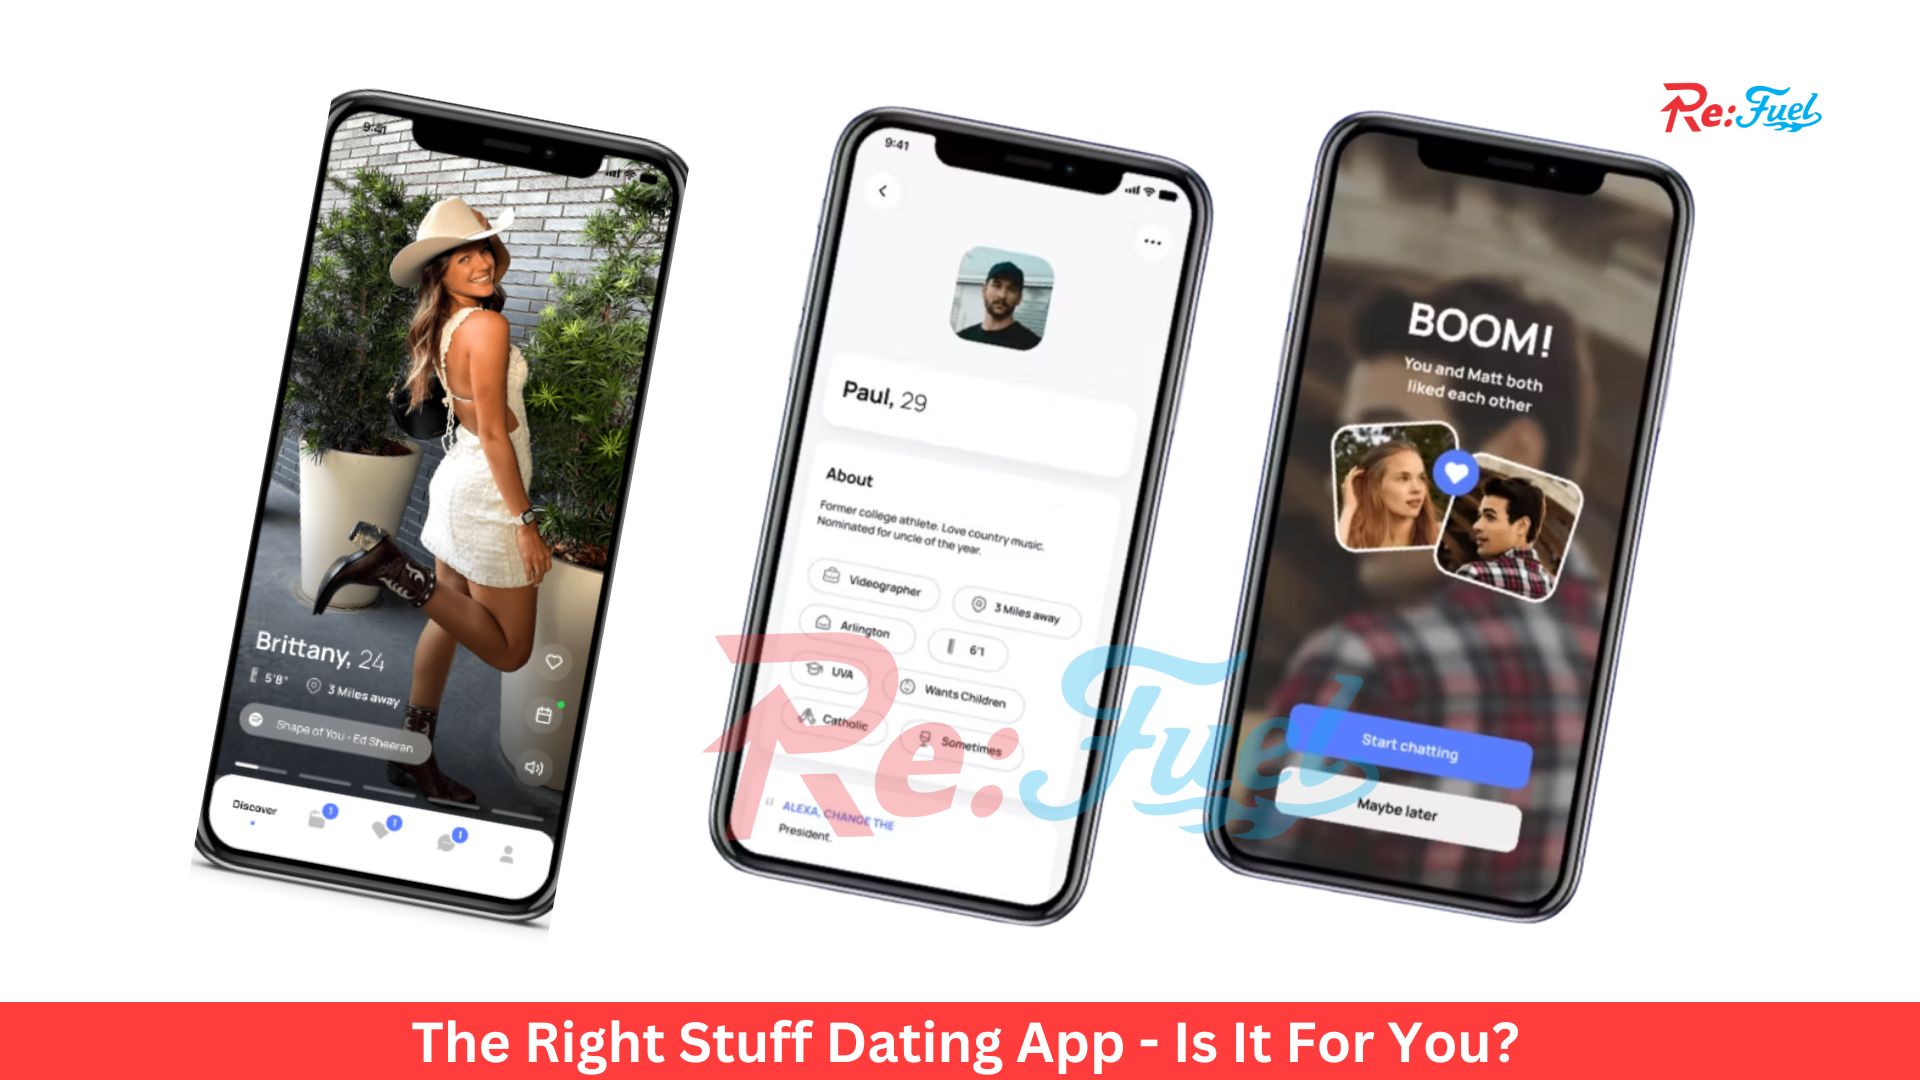 The Right Stuff Dating App - Is It For You?